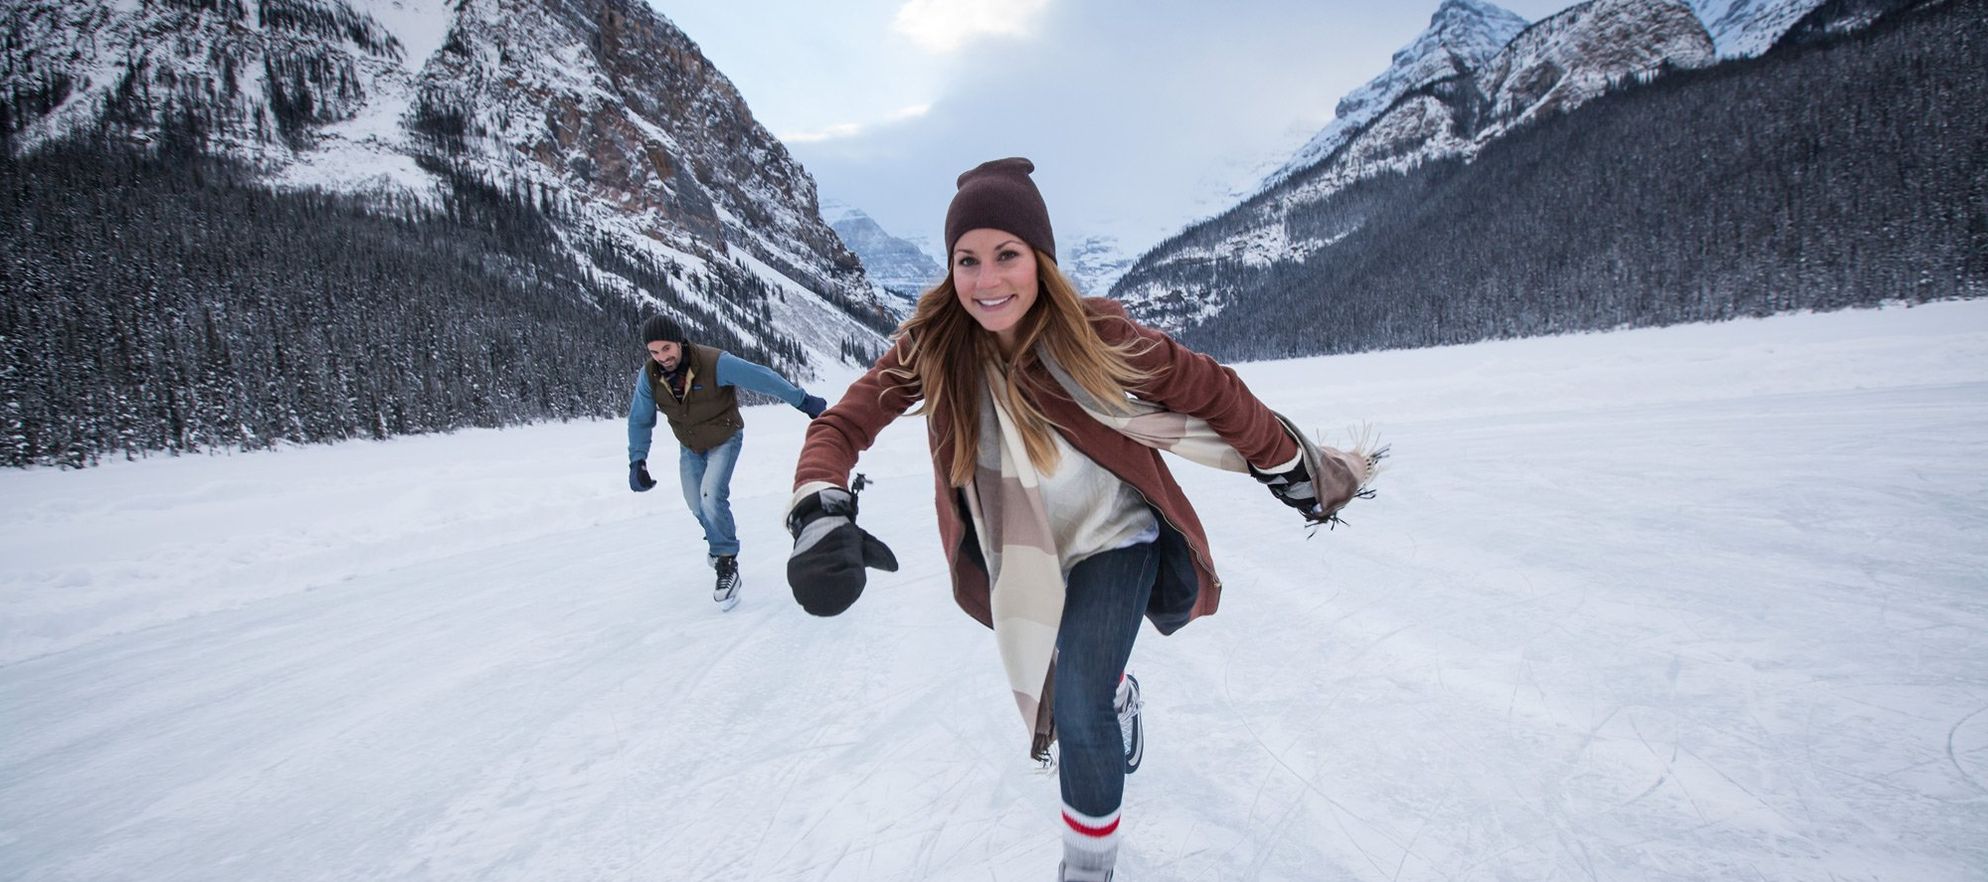 7 Winter Adventures To Try in Banff & Lake Louise